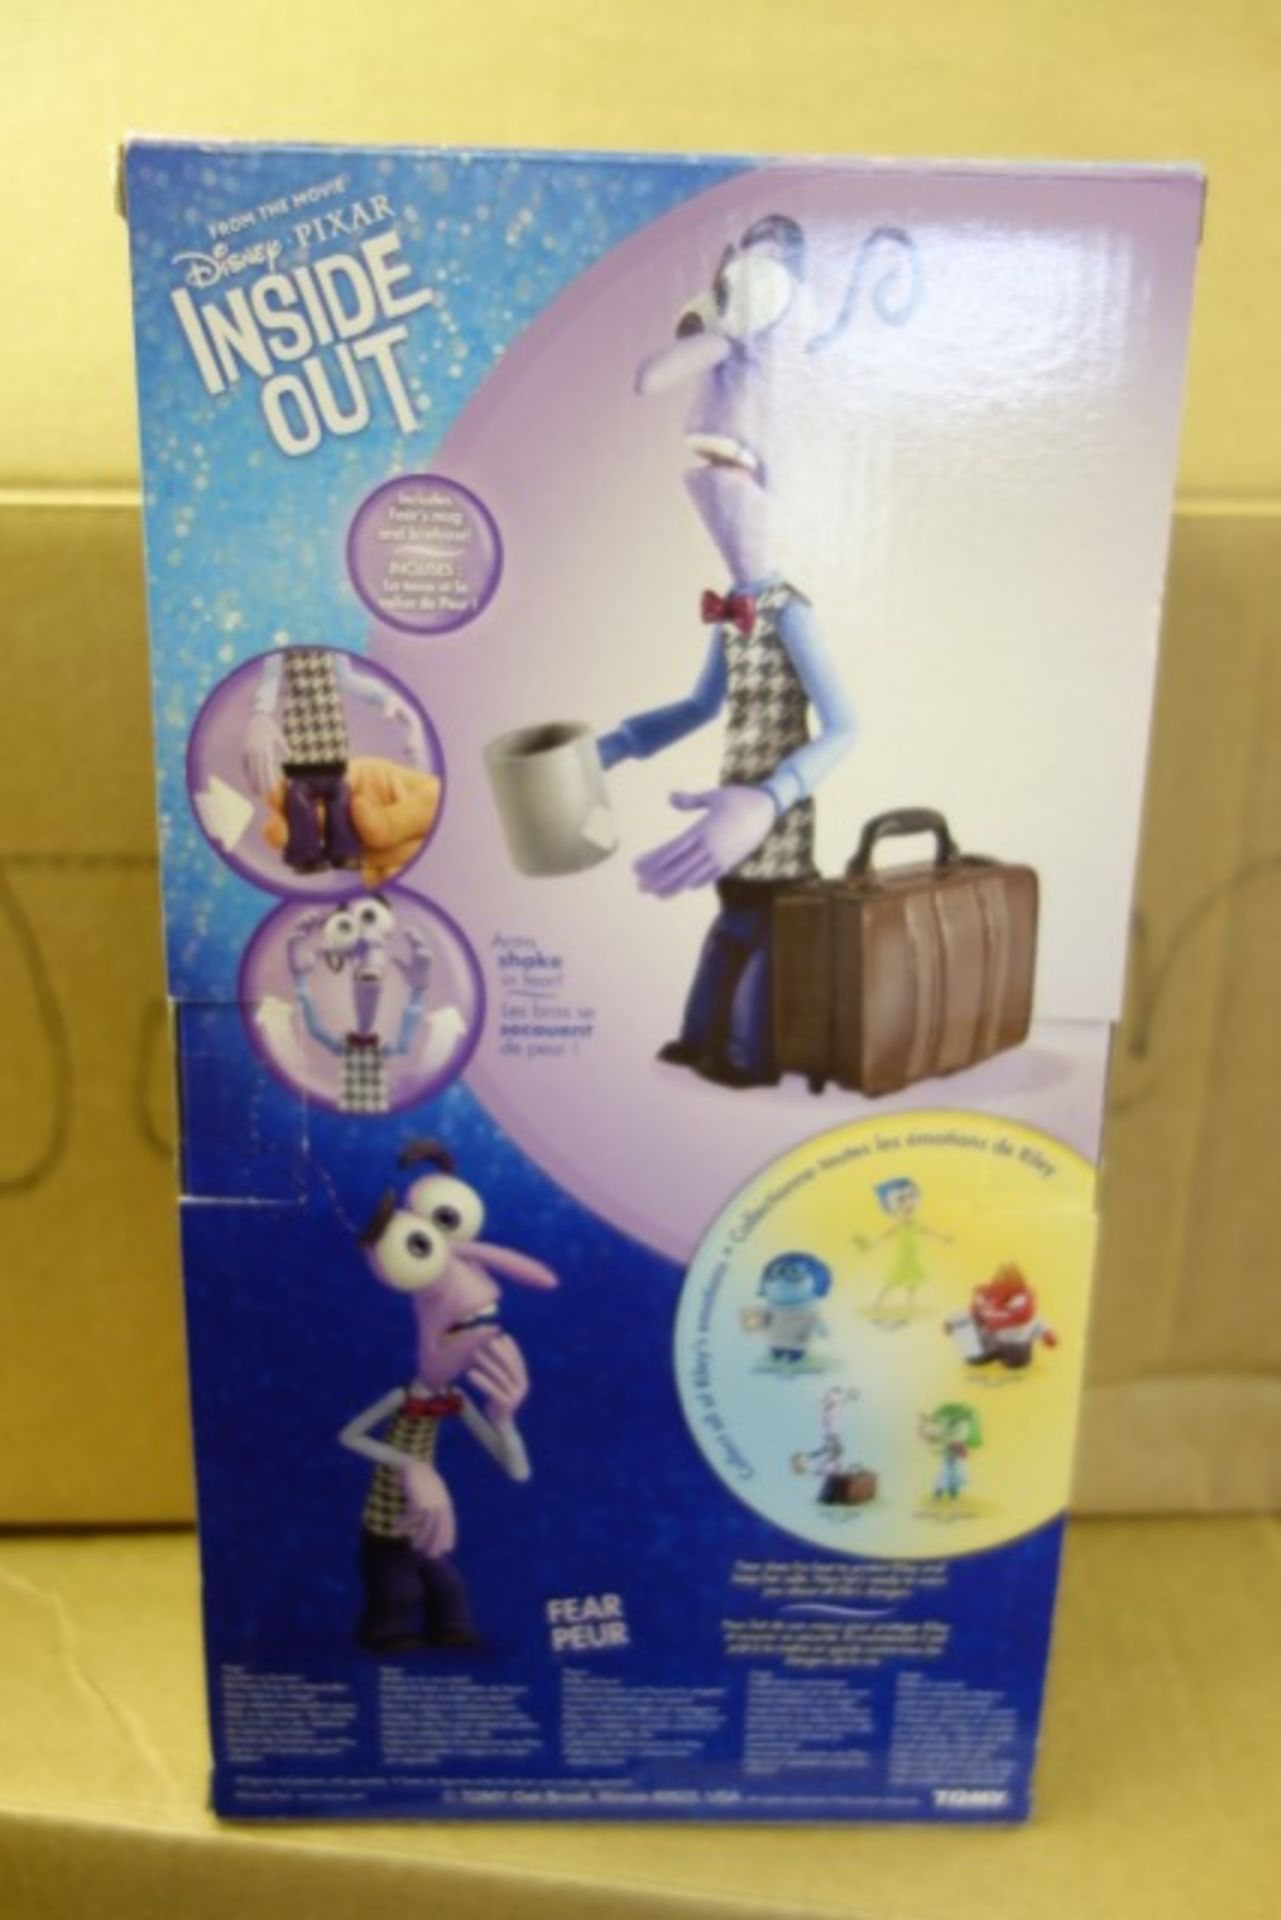 17 x Brand New - Disney Pixar Inside Out - Large Fear with Sound. Also Includes Fears Mug & - Image 2 of 2